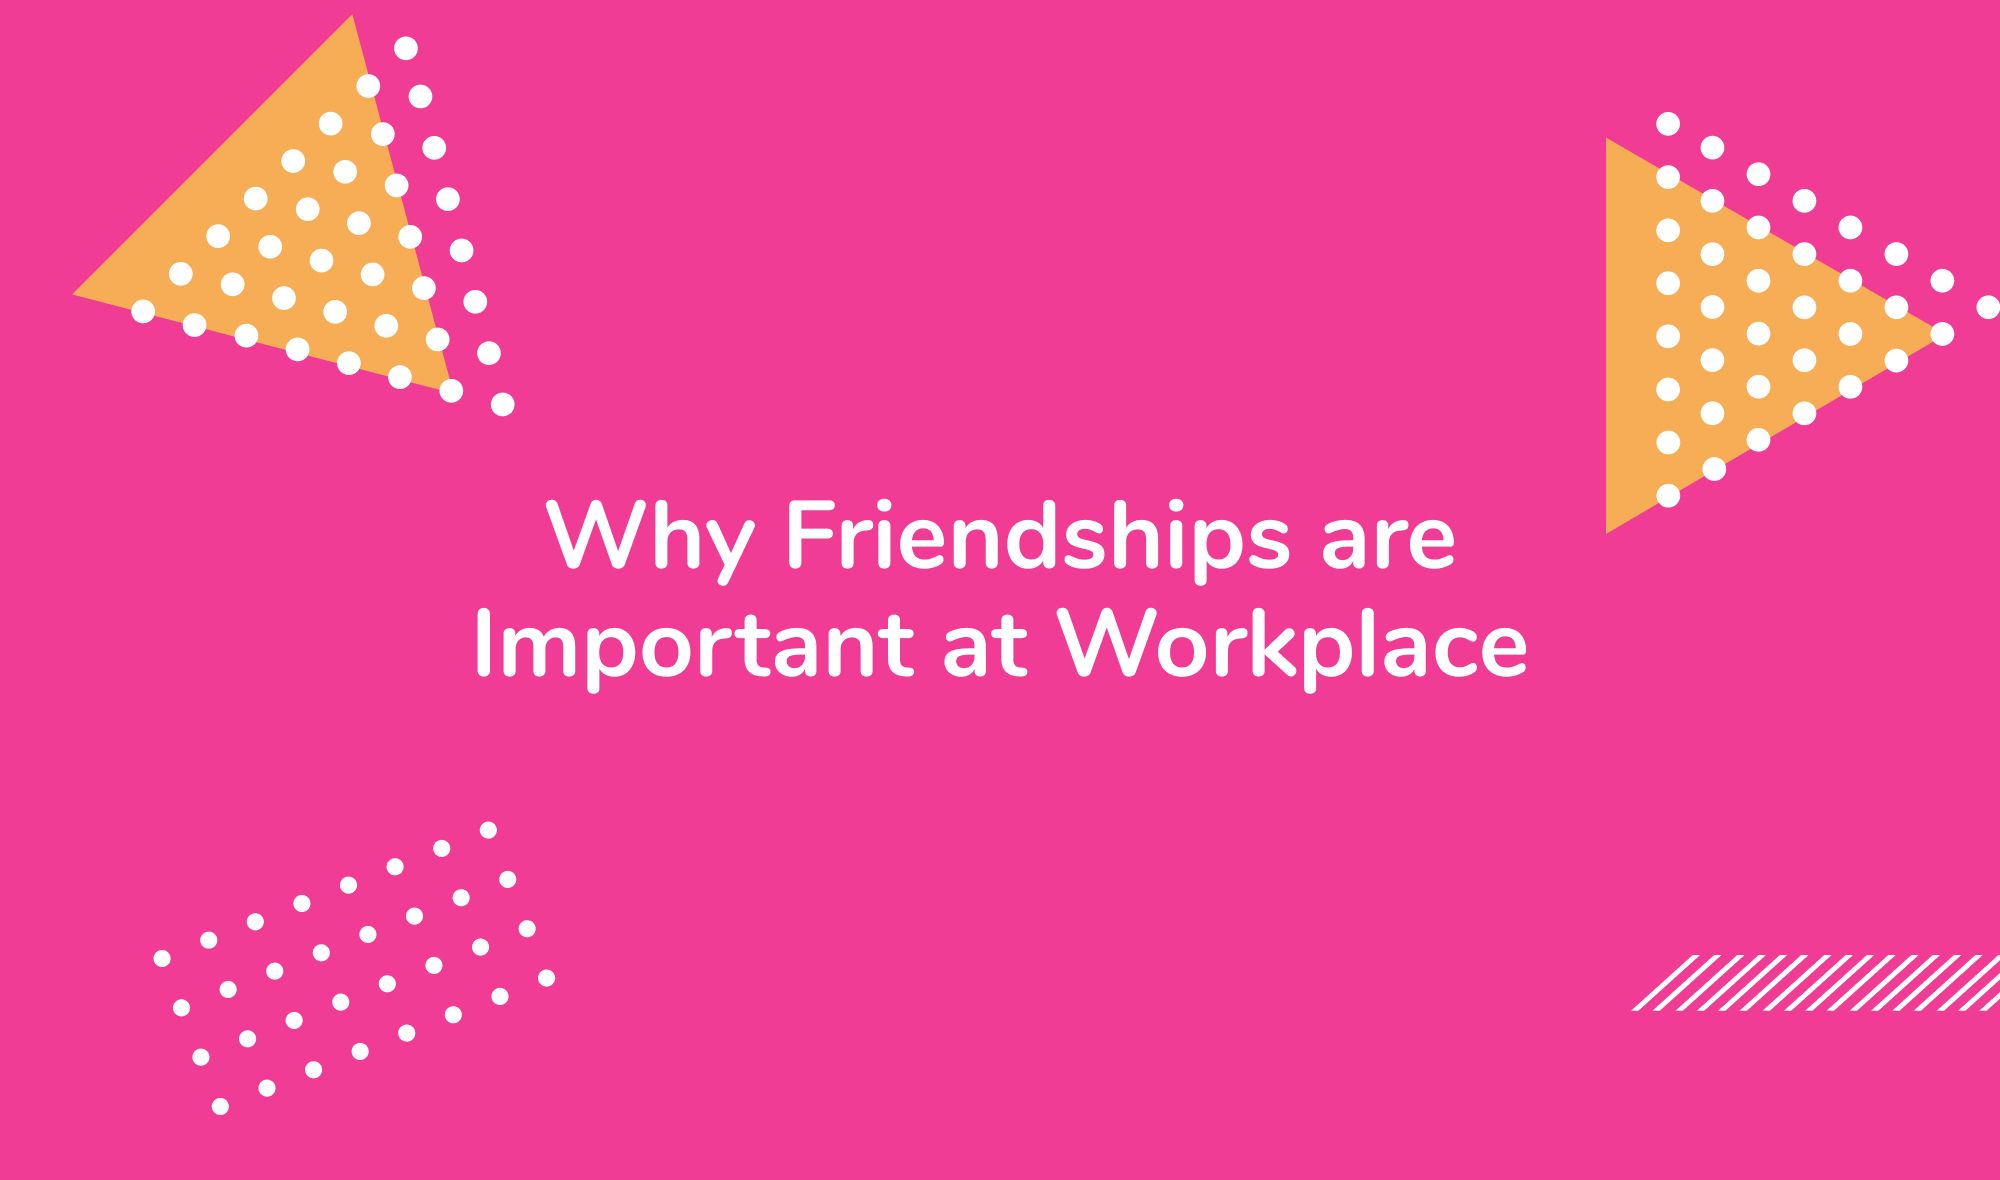 Why Friendships are Important at Workplace